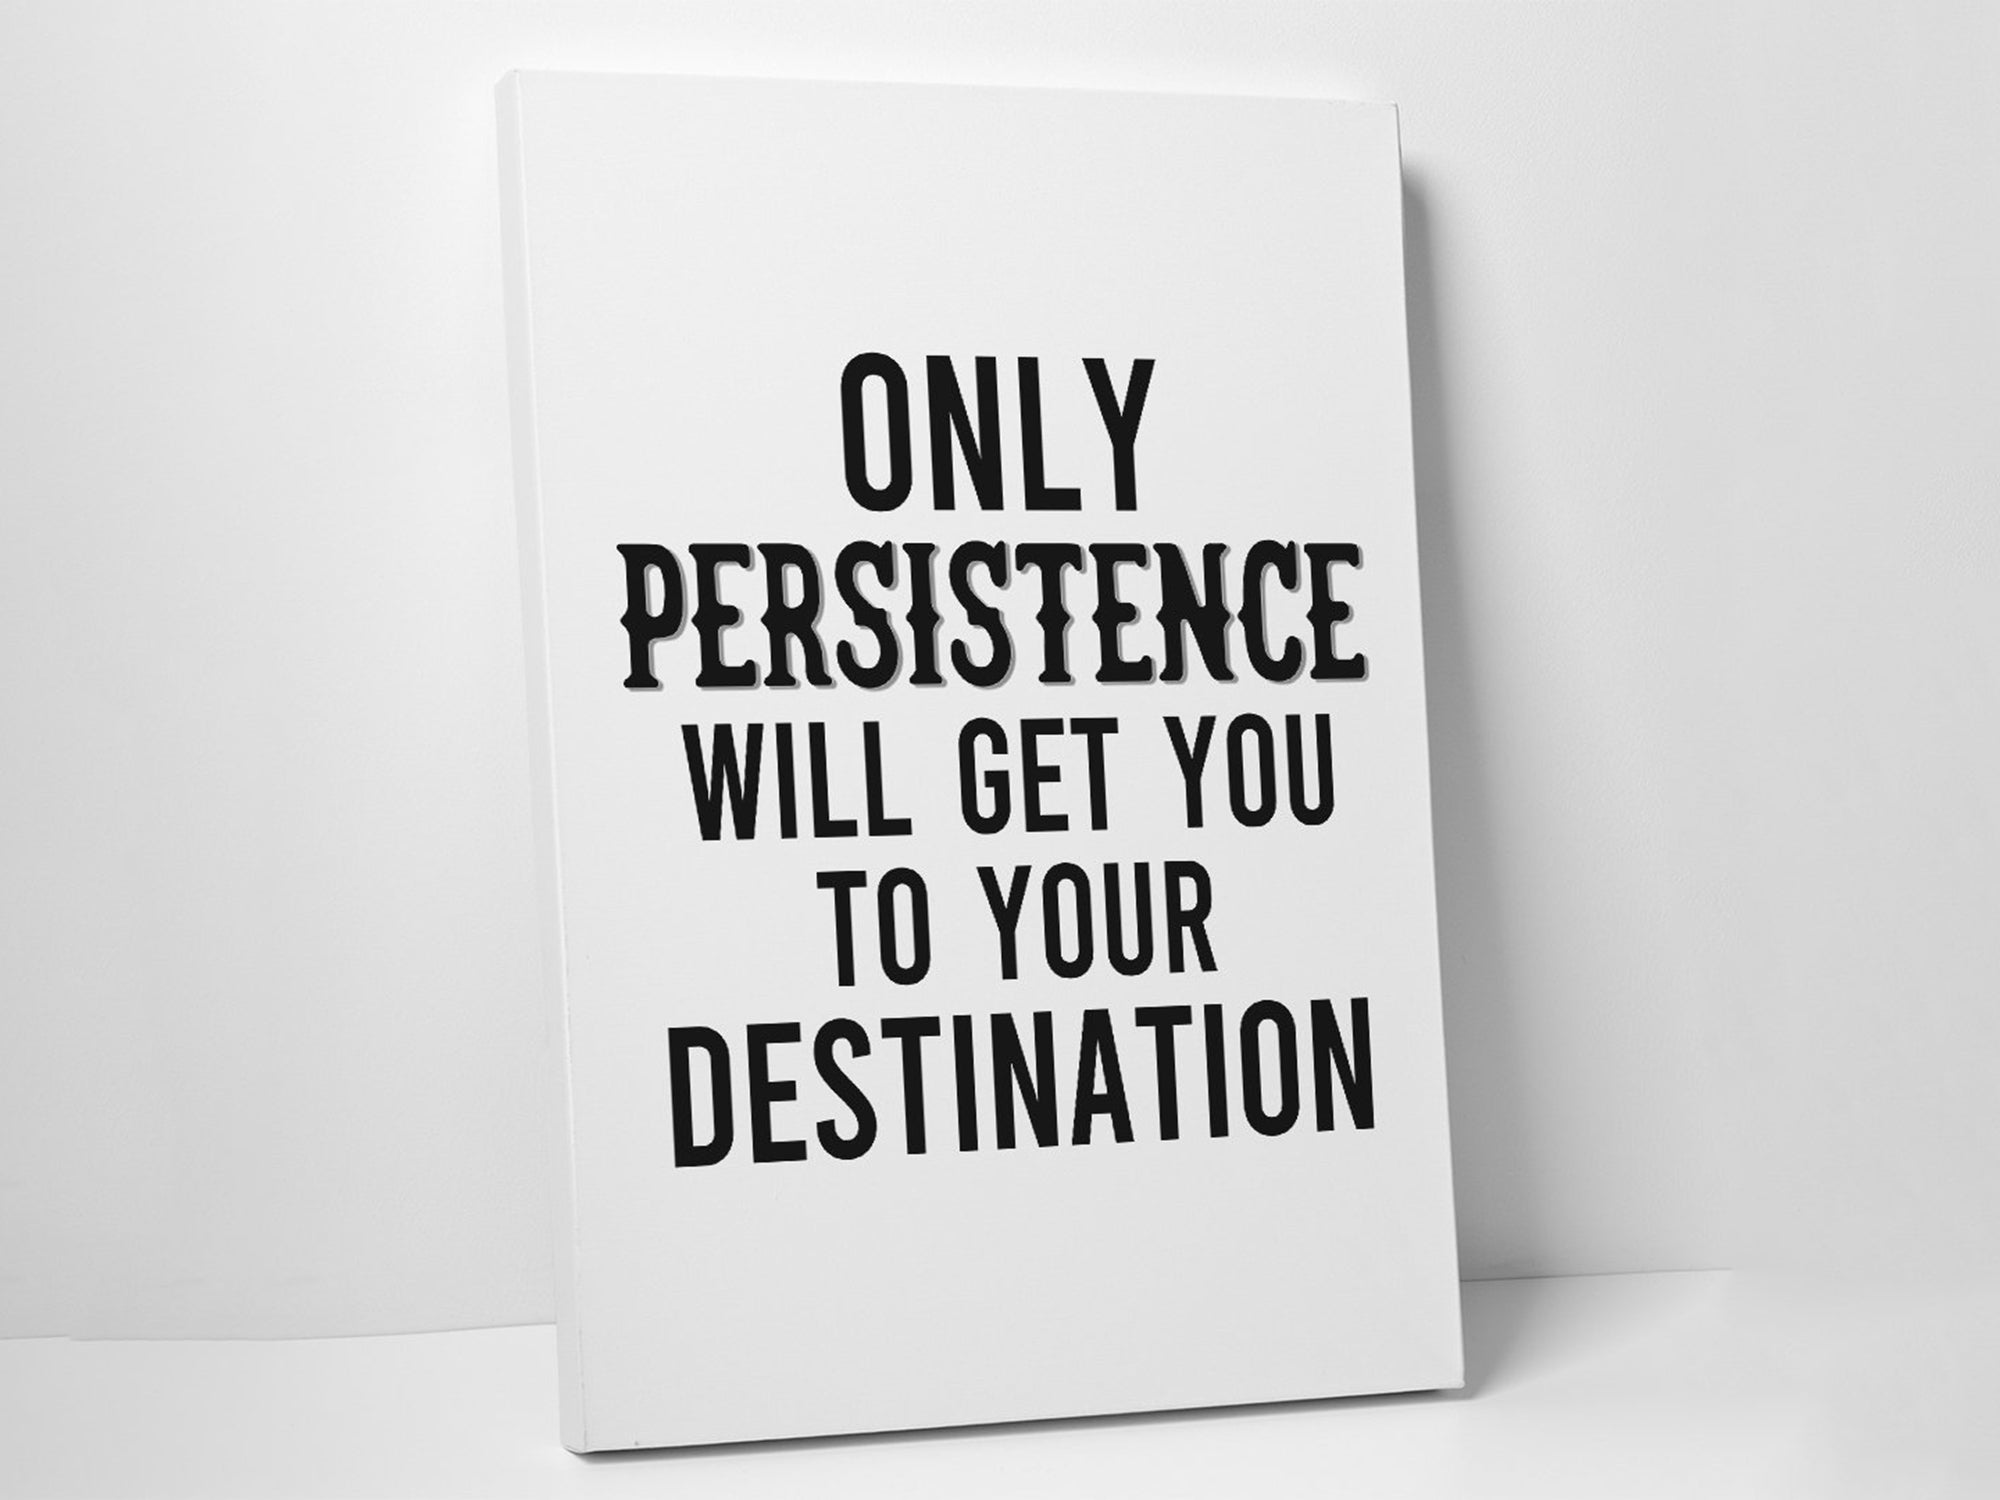 Persistence will Get You - Inspiring - Bedroom Canvas Wall Art